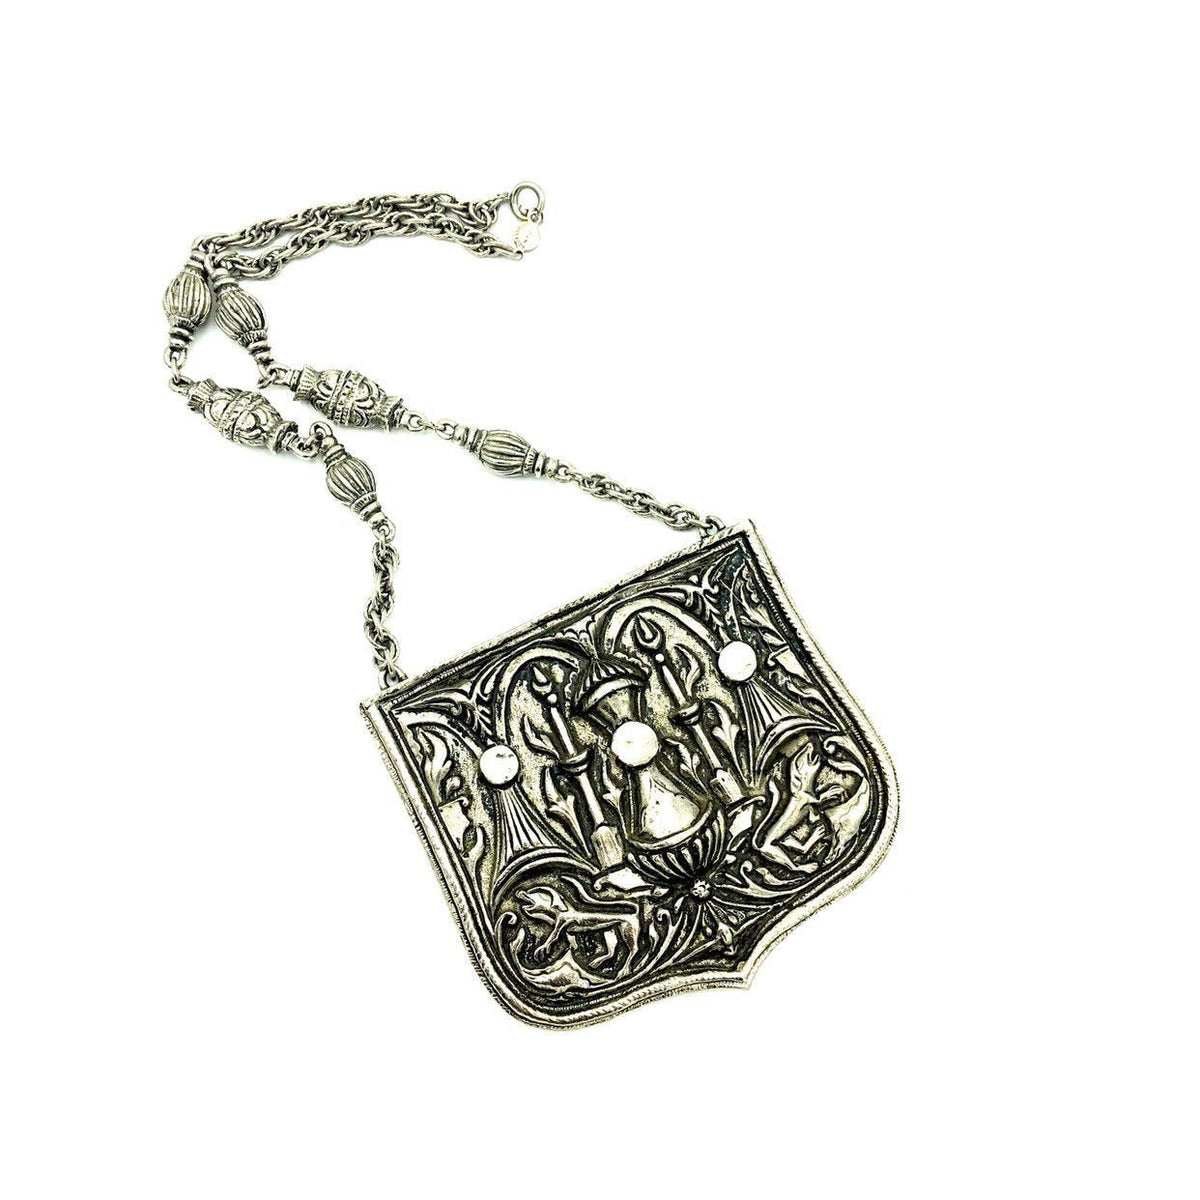 Silver Accessocraft NYC Large Medieval Revival Repousse Vintage Pendant - 24 Wishes Vintage Jewelry